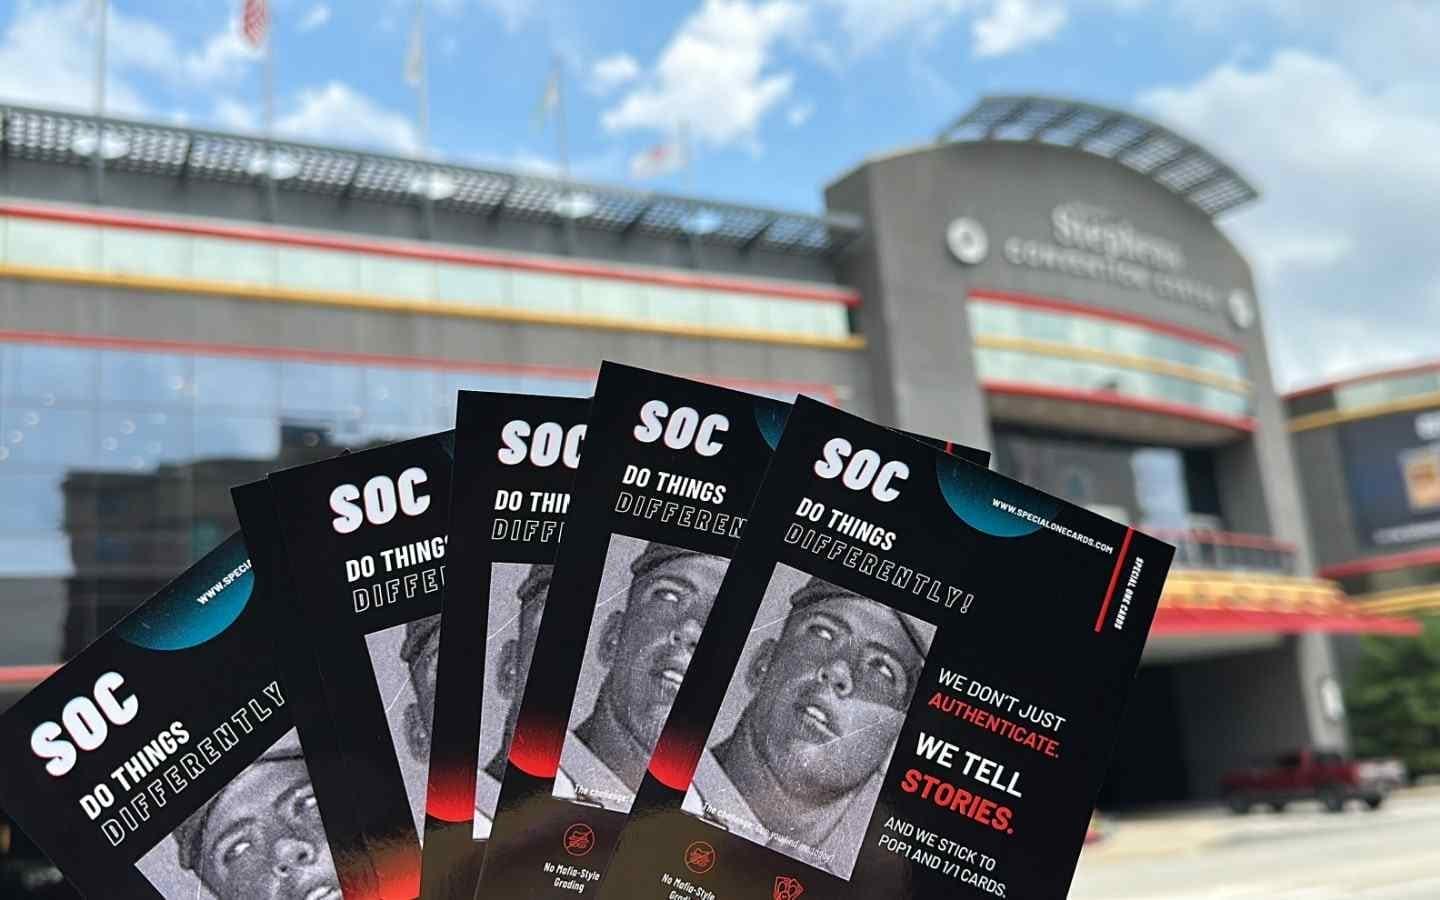 Special One Cards (SOC) at The National Sports Collectors Convention